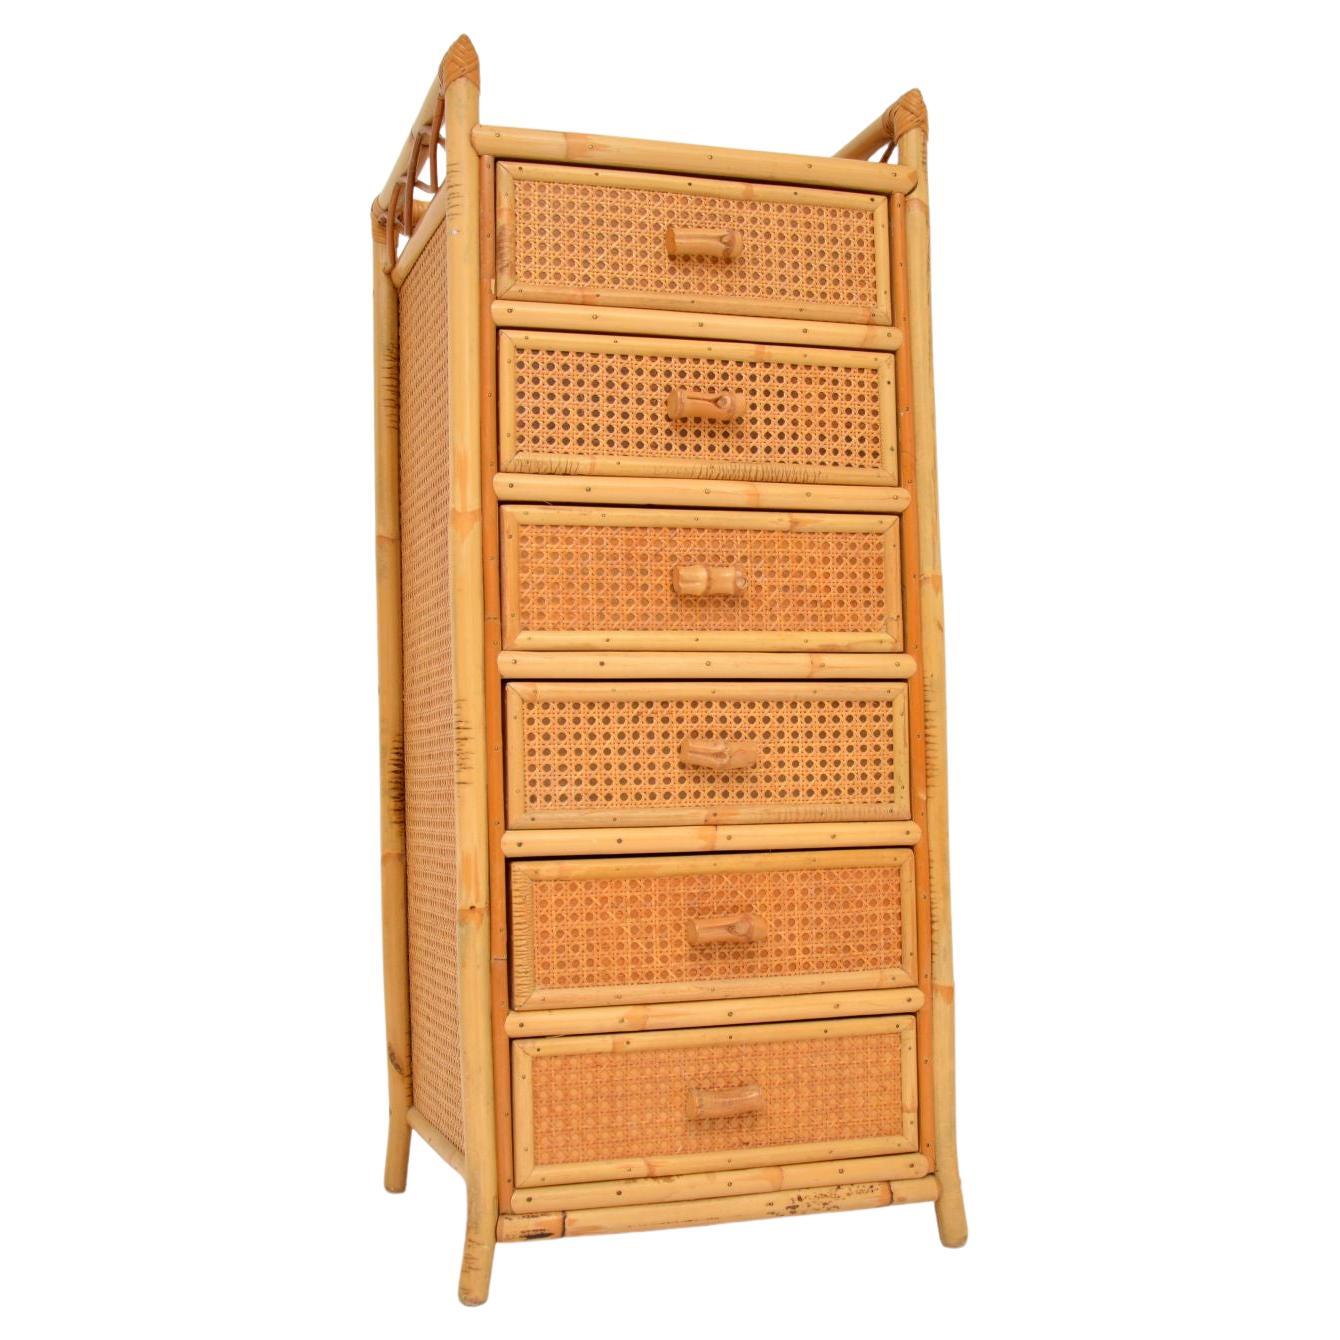 1970's Vintage Bamboo & Rattan Tallboy Chest of Drawers by Angraves For Sale